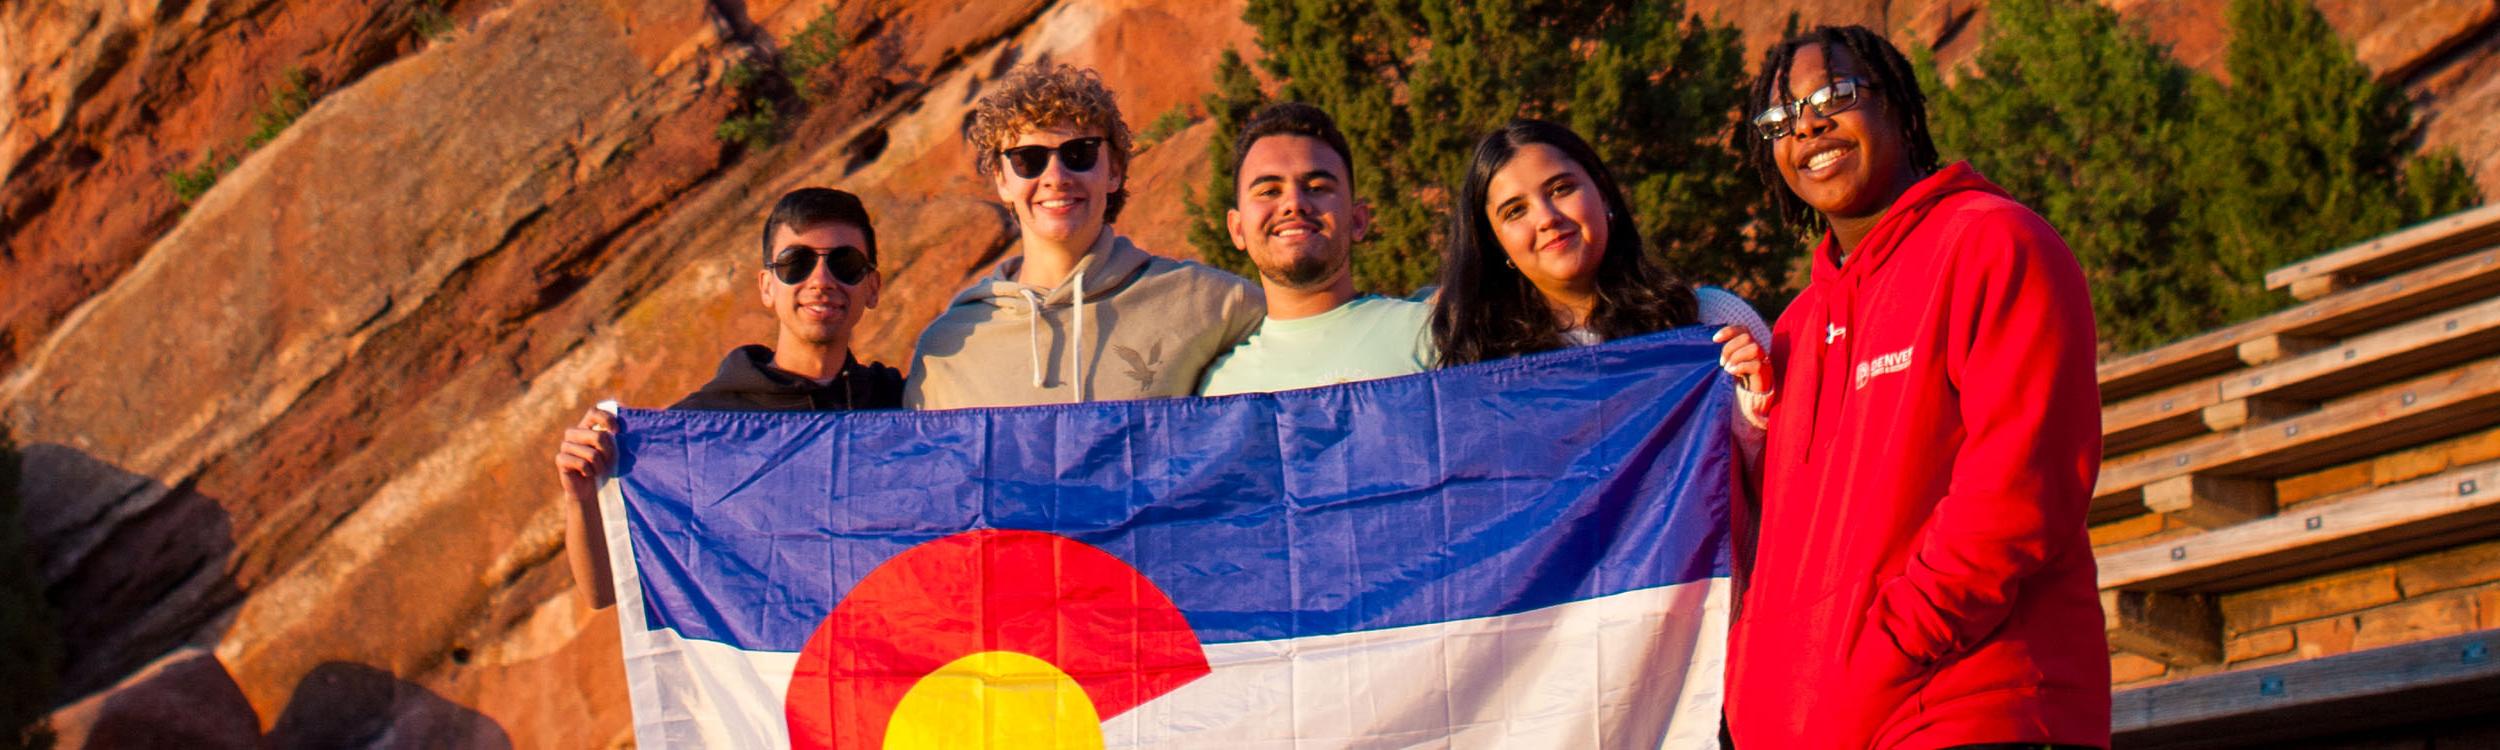 A group of young people holding the Colorado flag at Red Rocks amphitheater